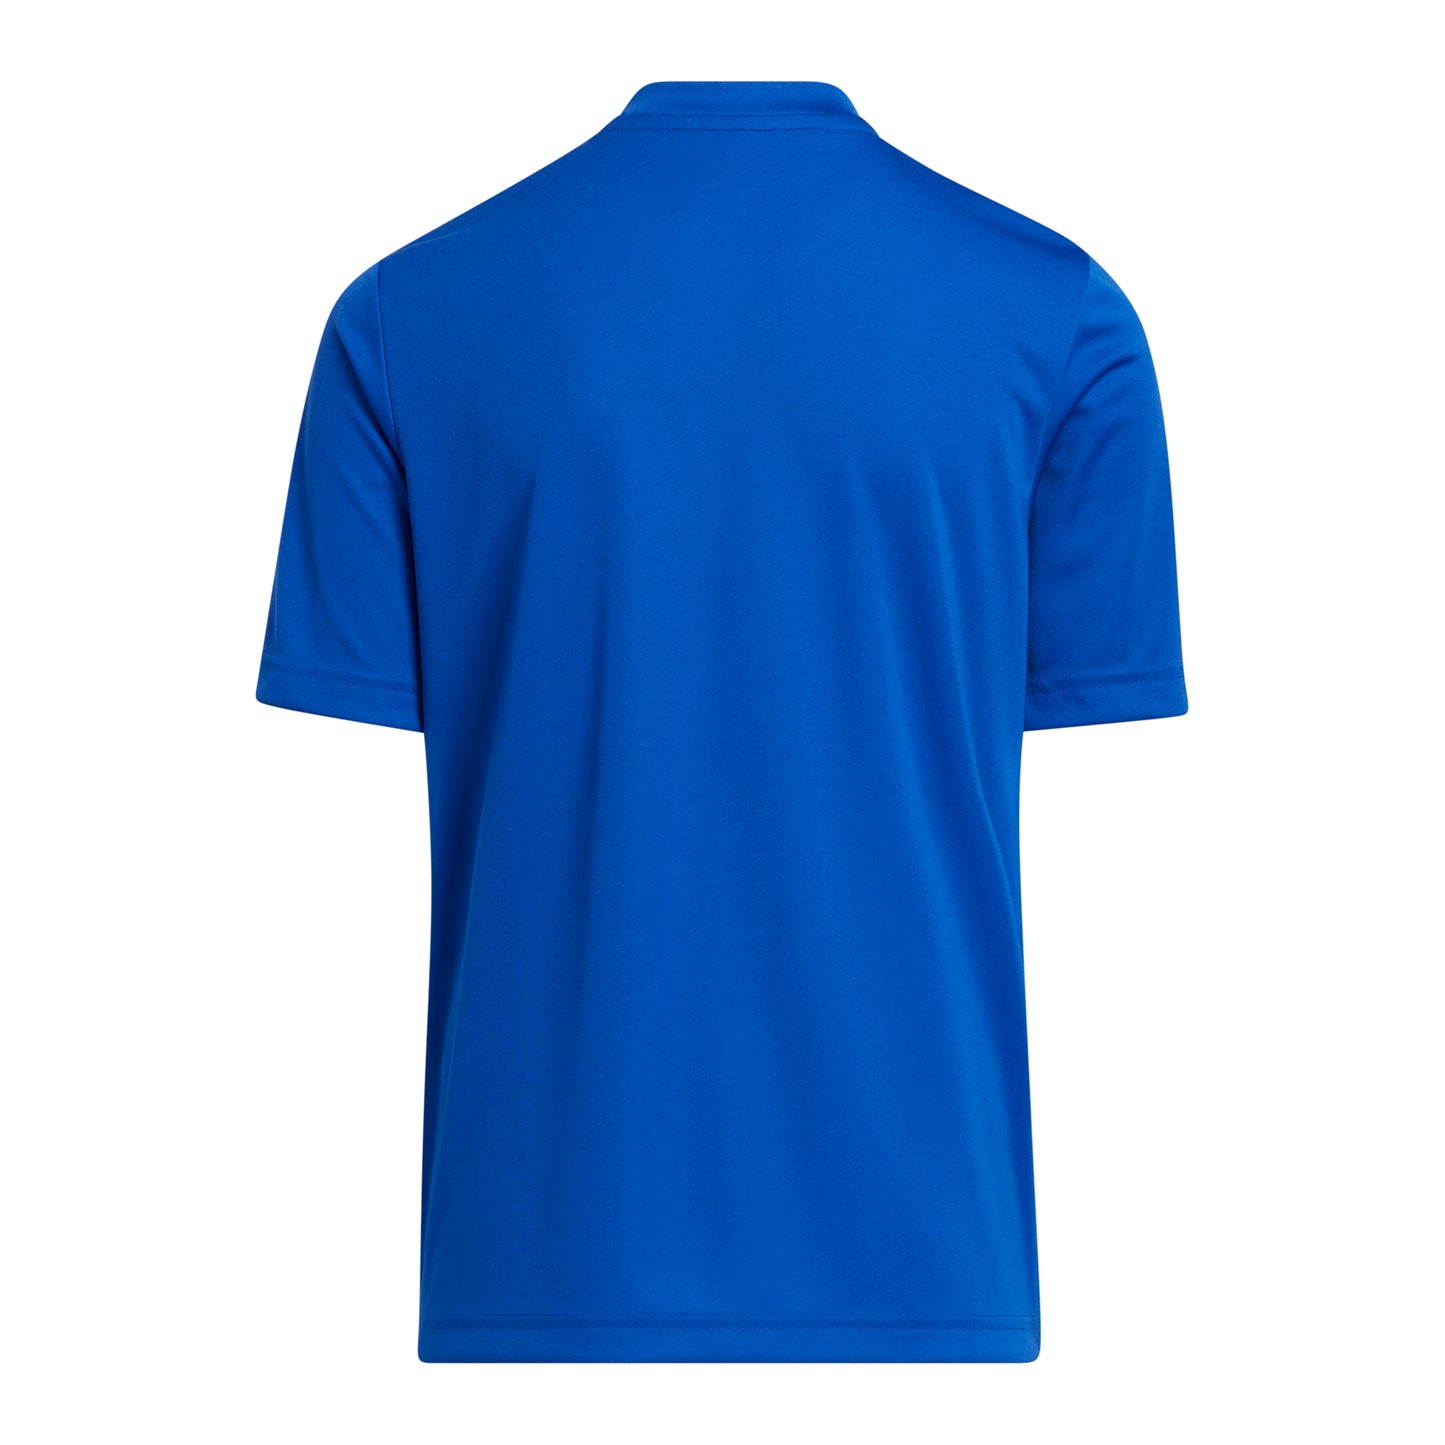 adidas ENTRADA 22 GRAPHIC Soccer Jersey | Team Royal Blue | Youth